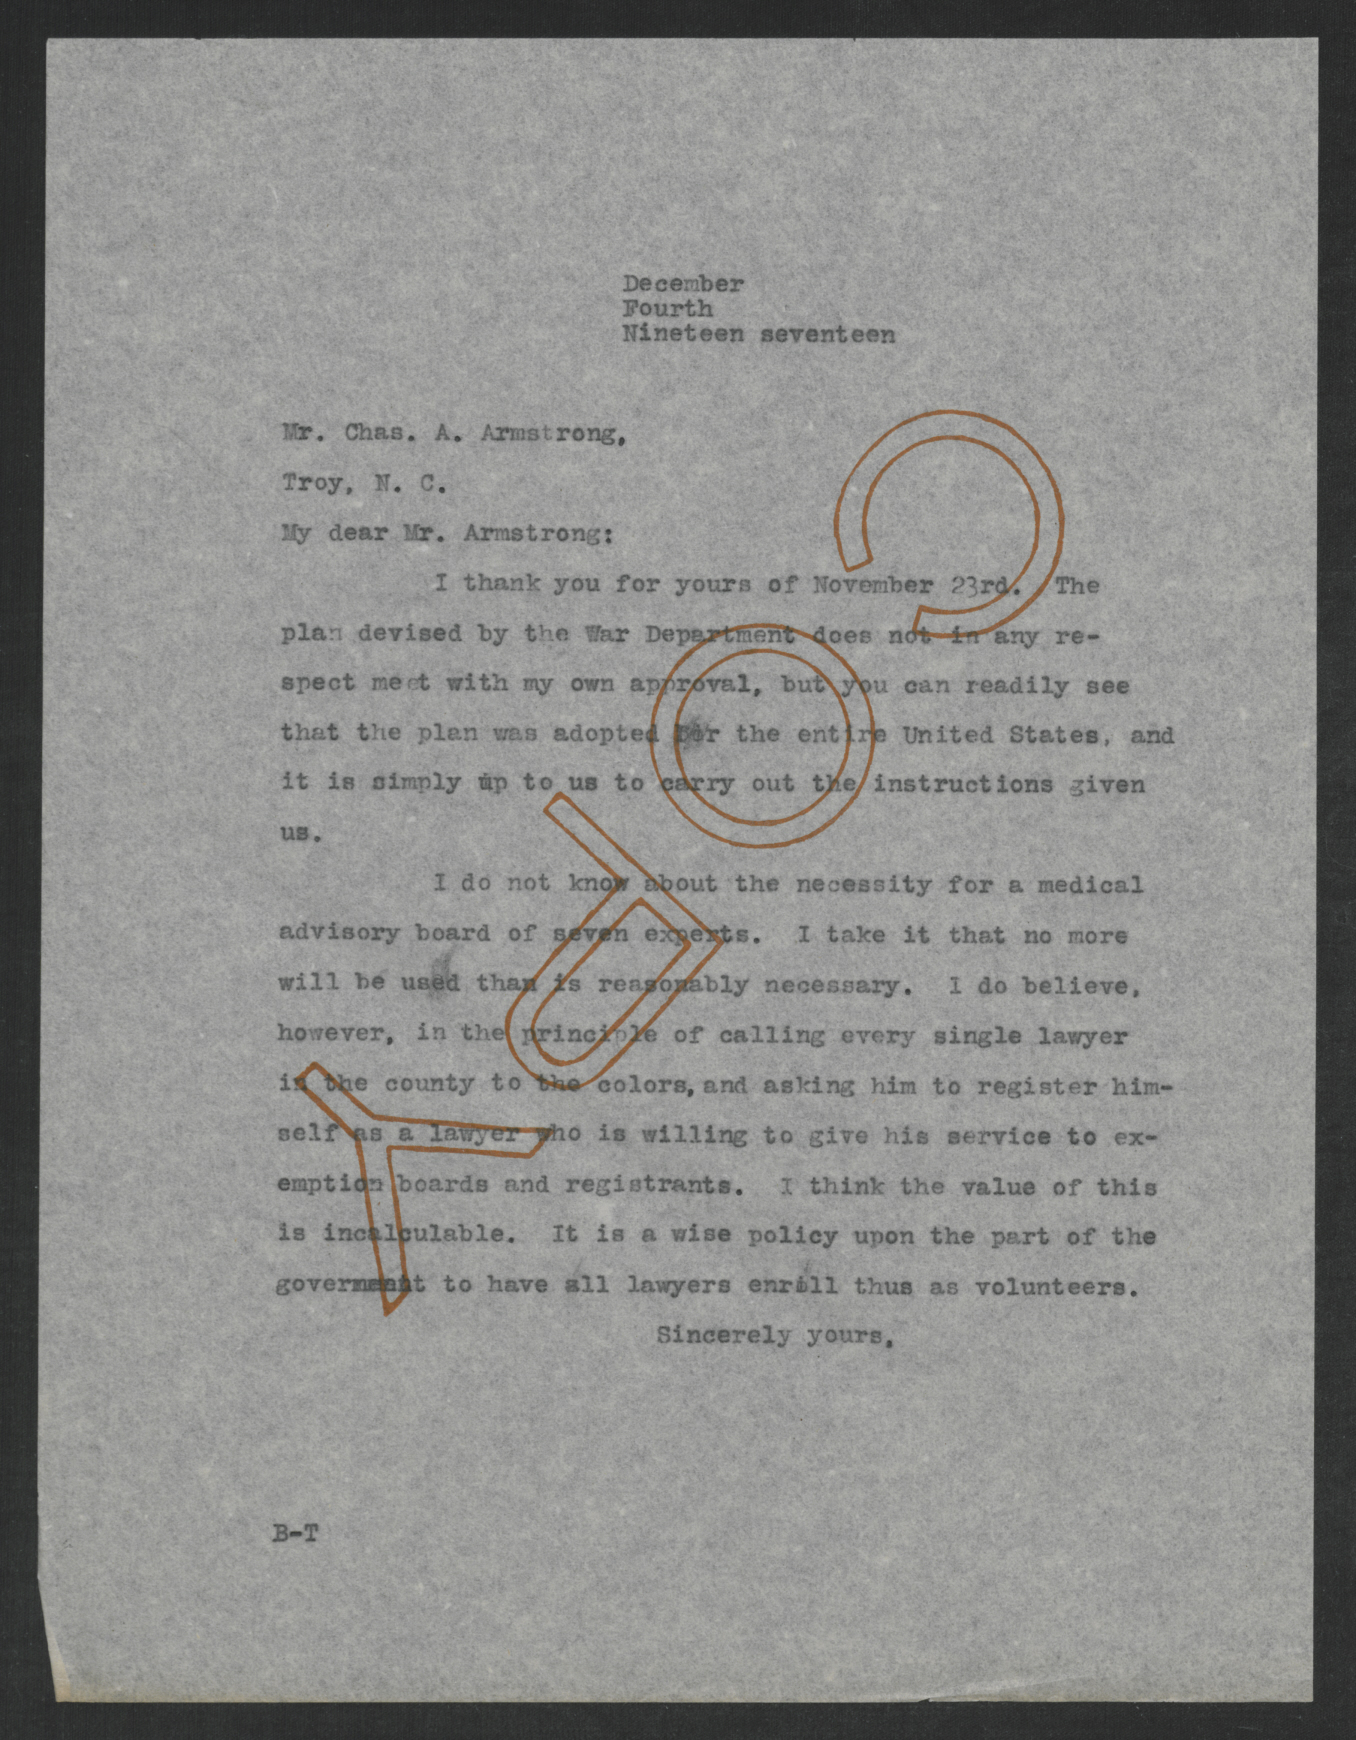 Letter from Thomas W. Bickett to Charles A. Armstrong, December 4, 1917